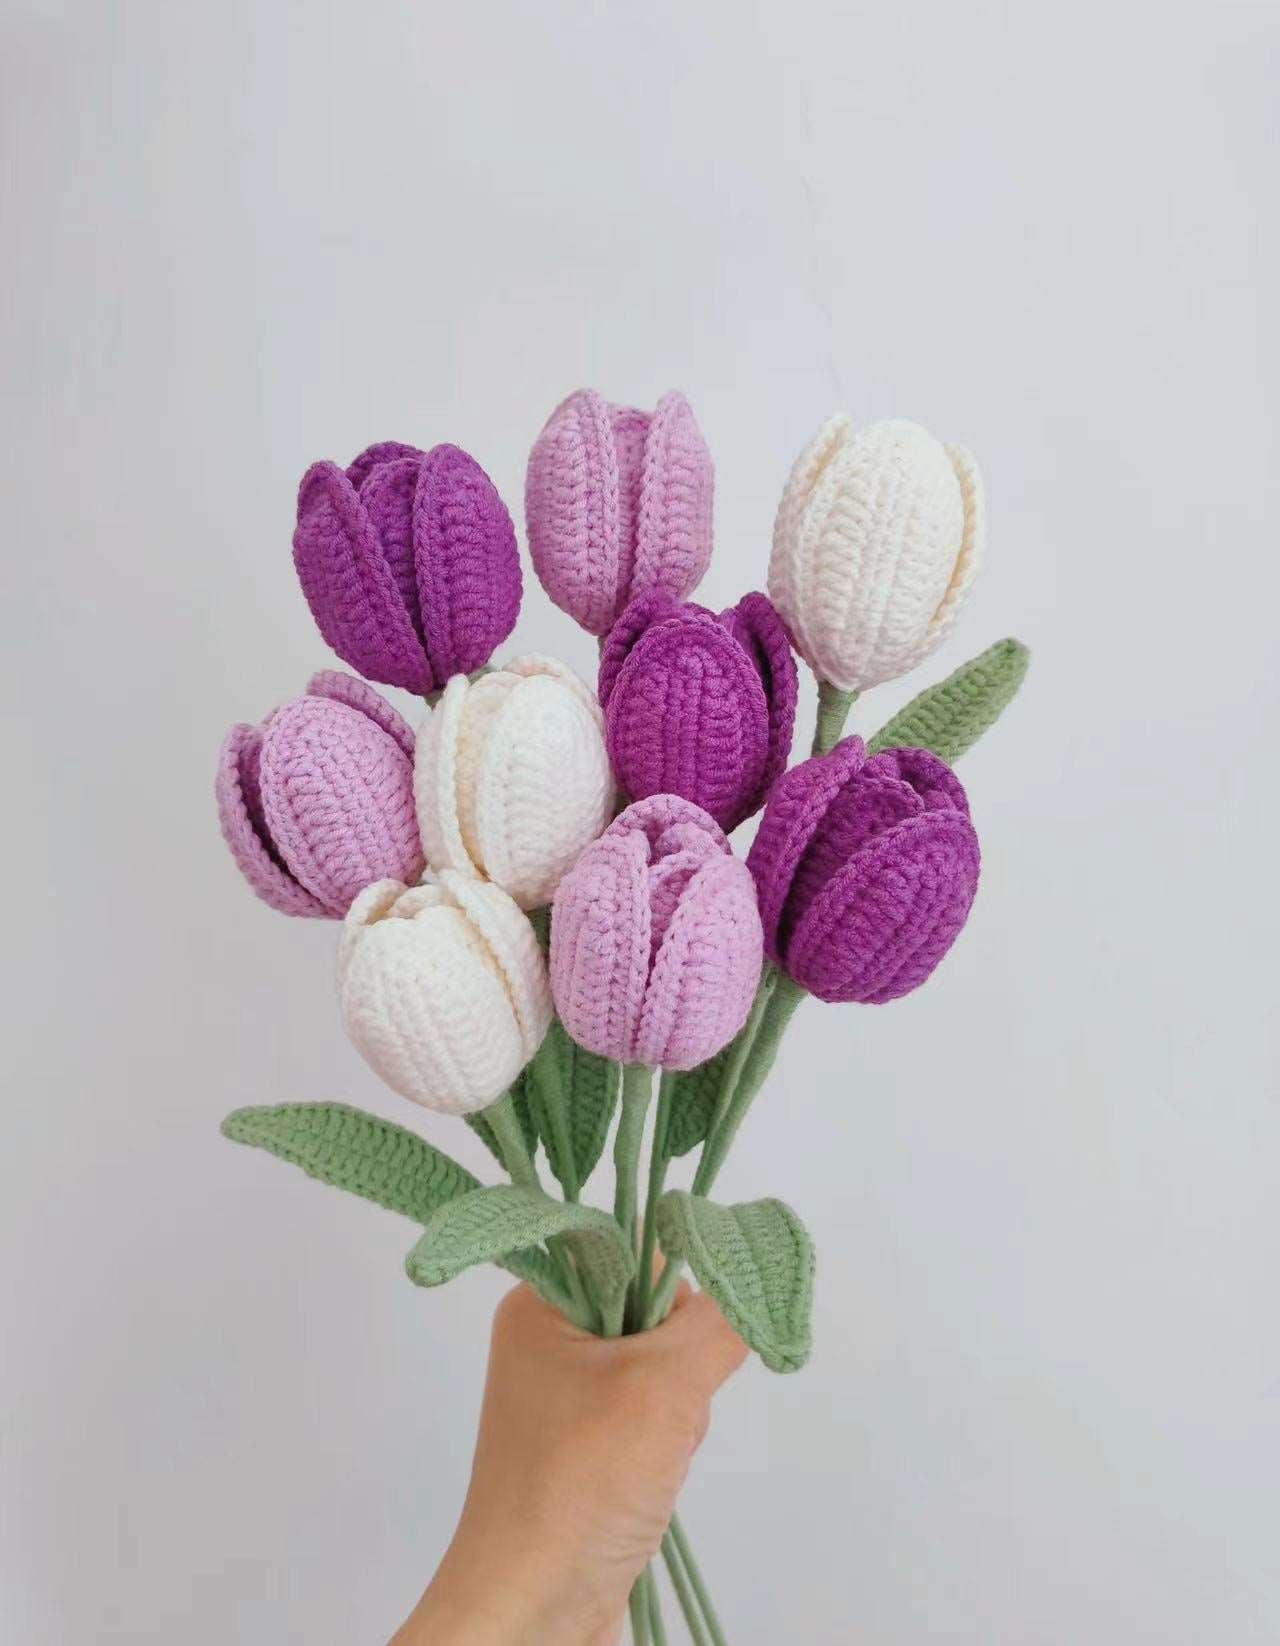 Exquisite Handcrafted Crochet Tulip Bouquet for Home Decor